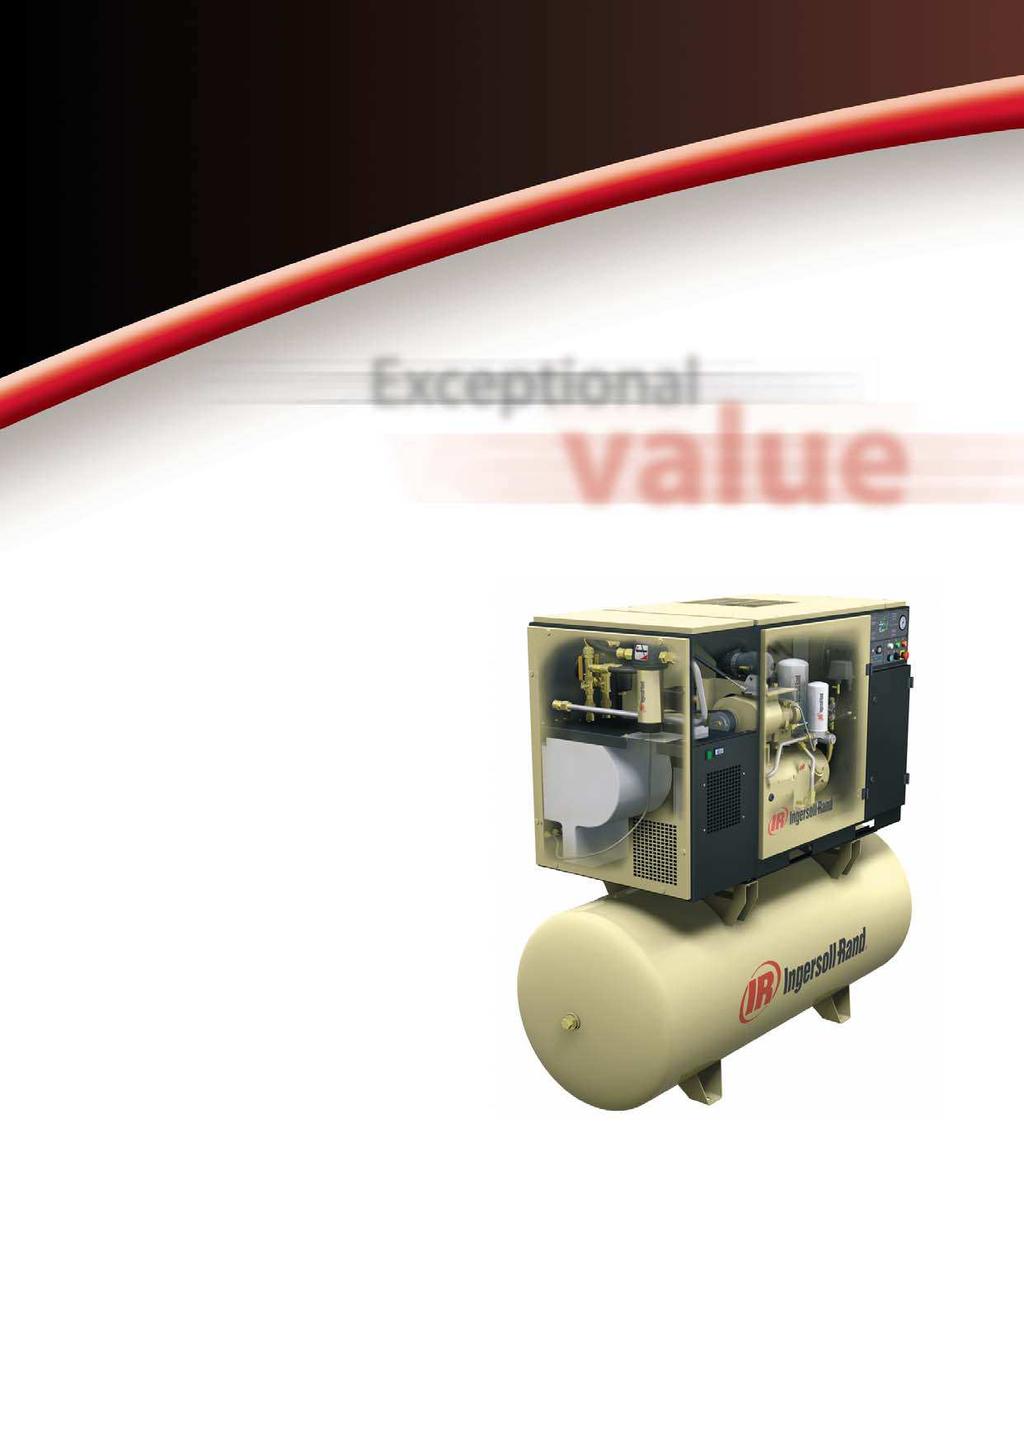 Rotary Screw Compressors UP5 Series 11-37 kw Ultimate Reliability Maximum Uptime Ingersoll-Rand is so confident in the performance of the UP-Series, that we ve extended the warranty to 5 years.